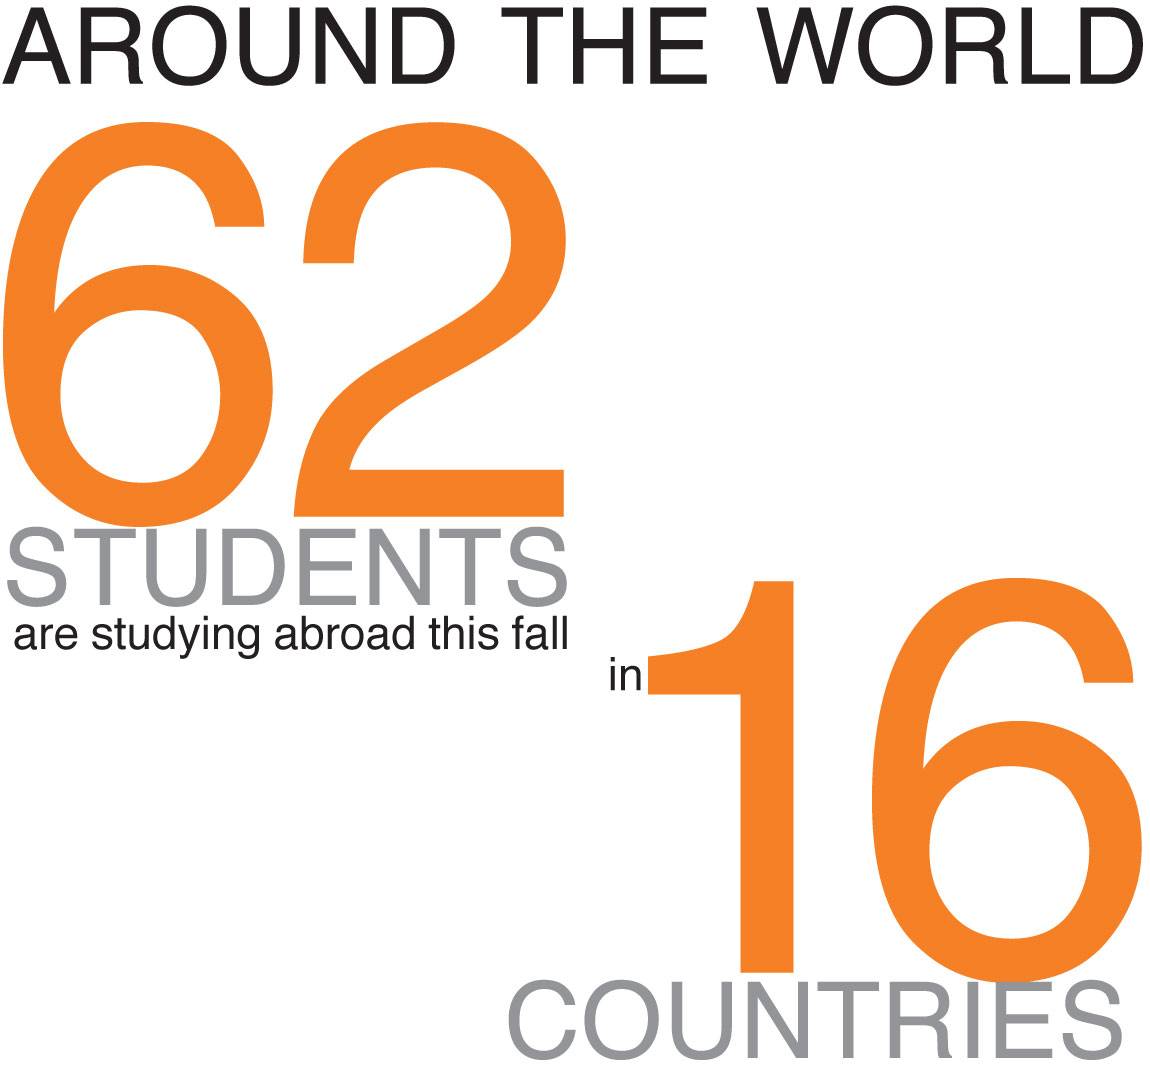 “Around the world: 62 students are studying abroad this fall in 16 countries”